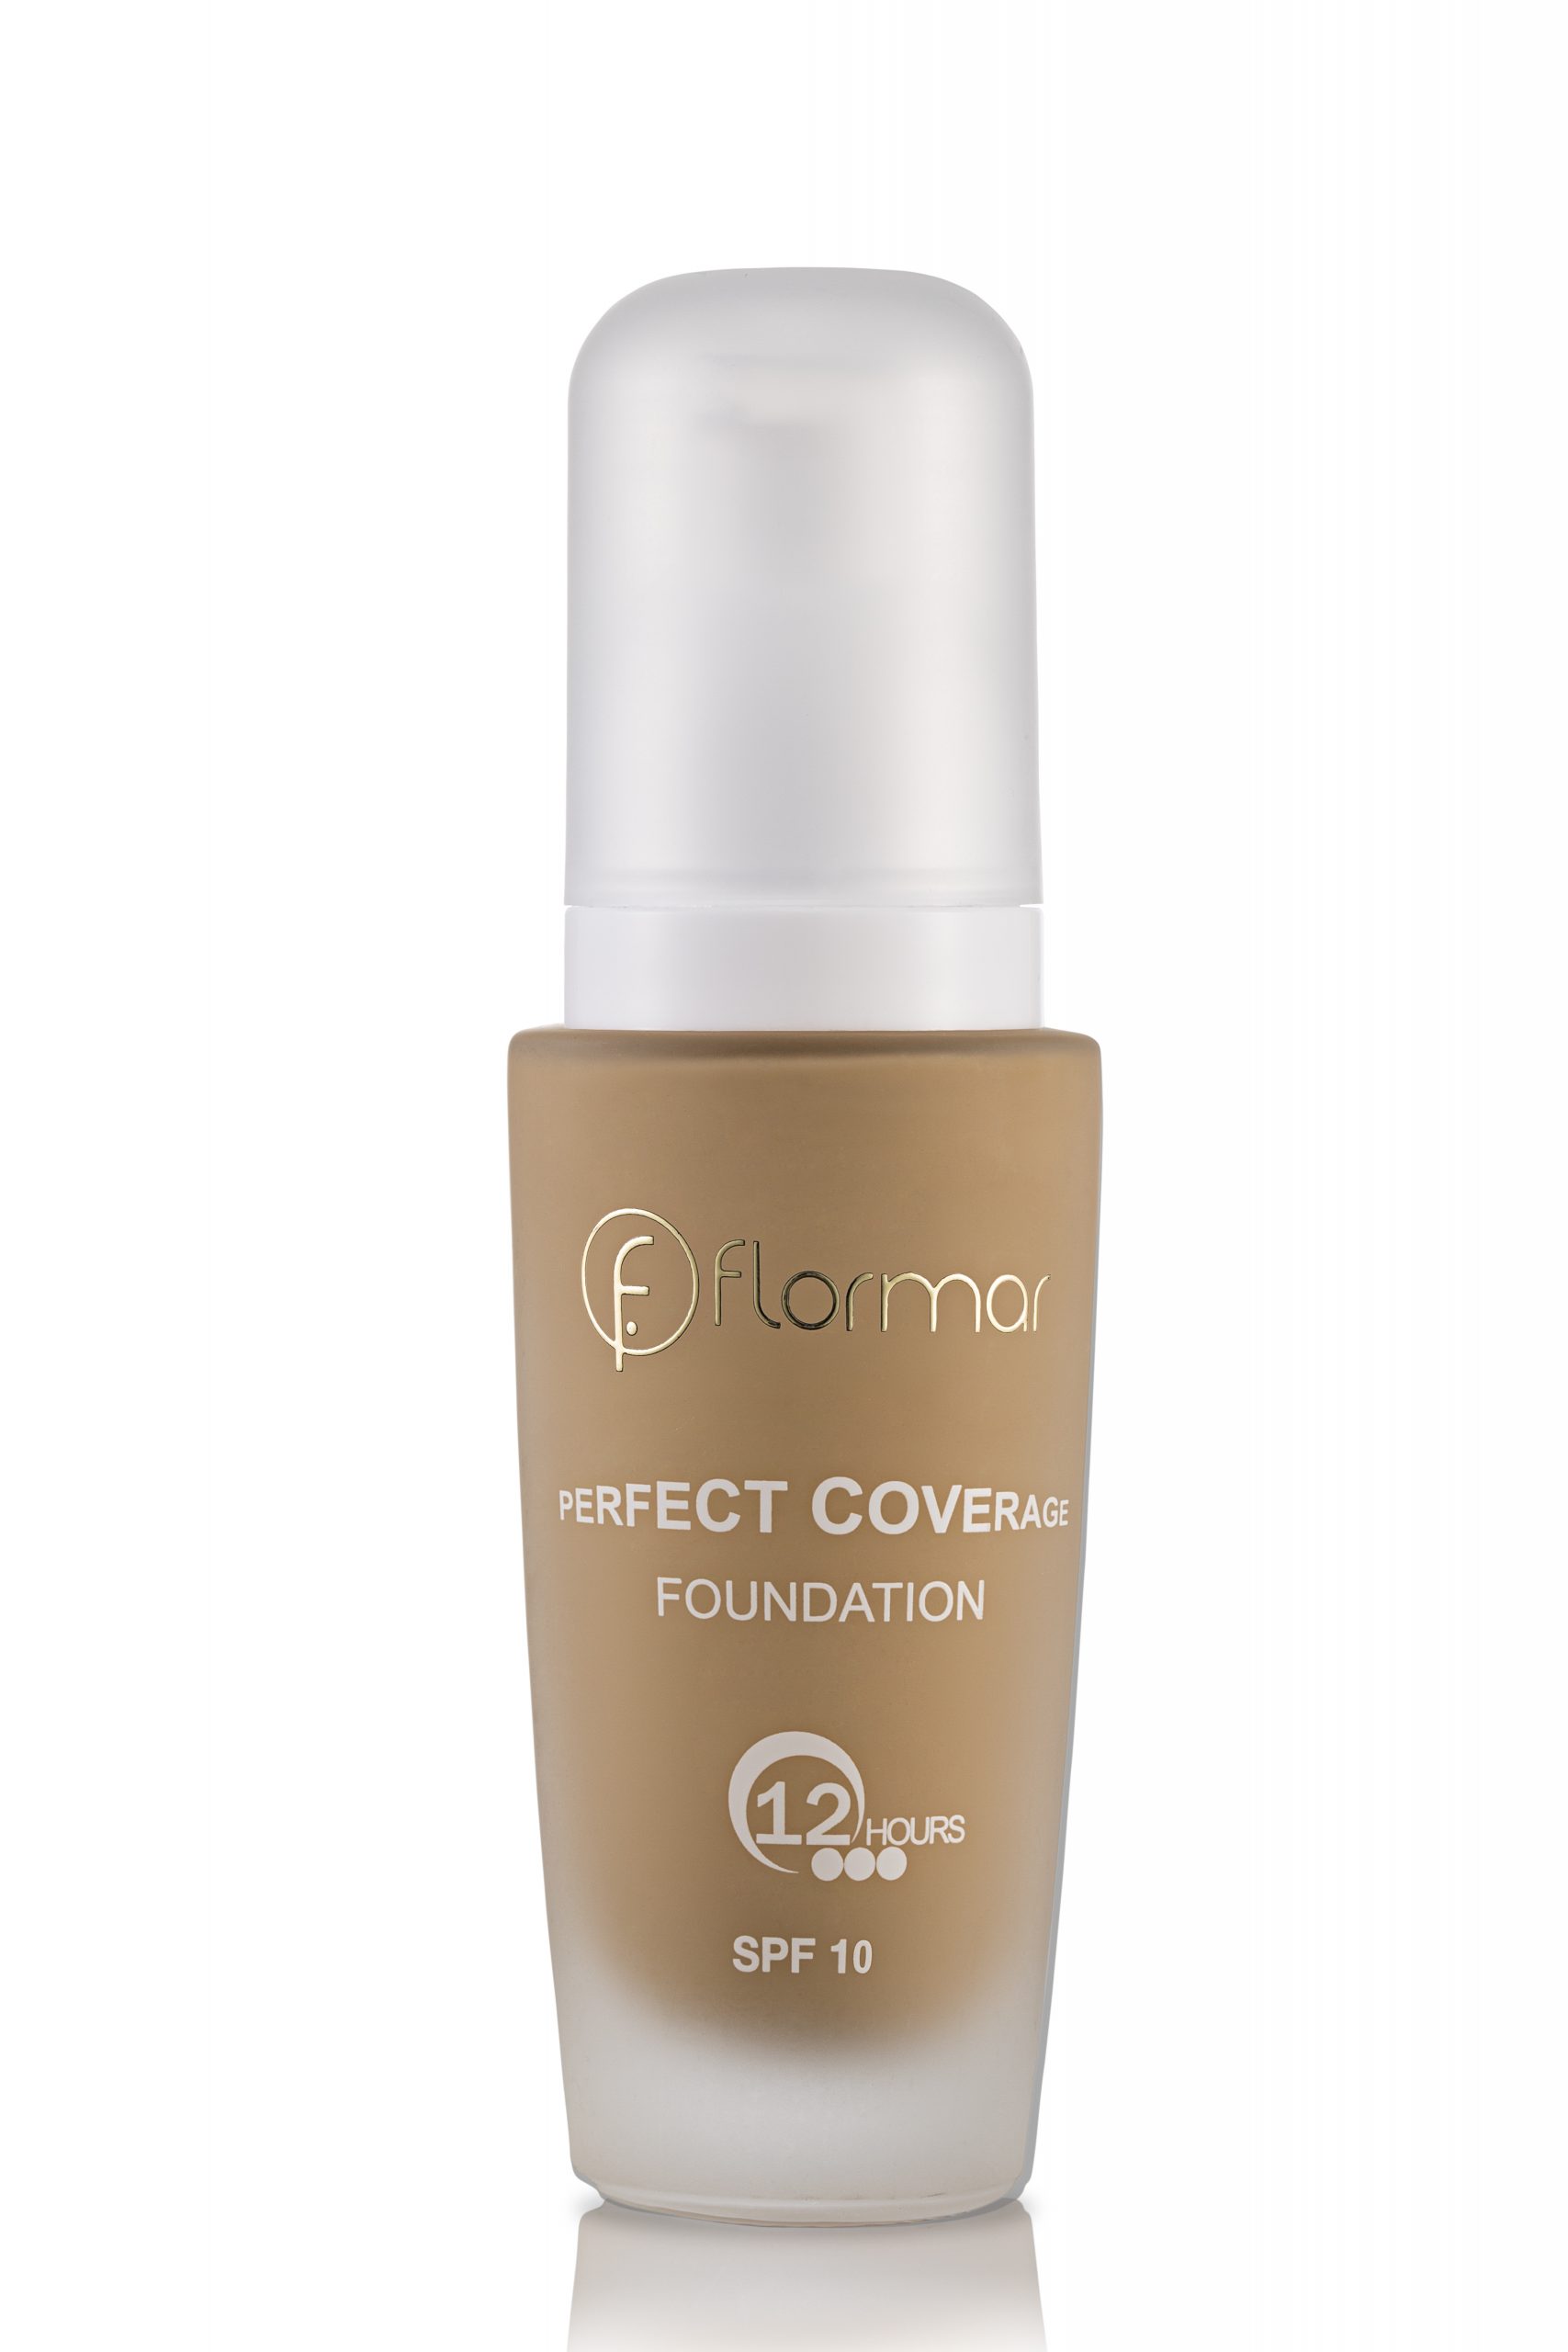 Flormar - Perfect Coverage Foundation provides